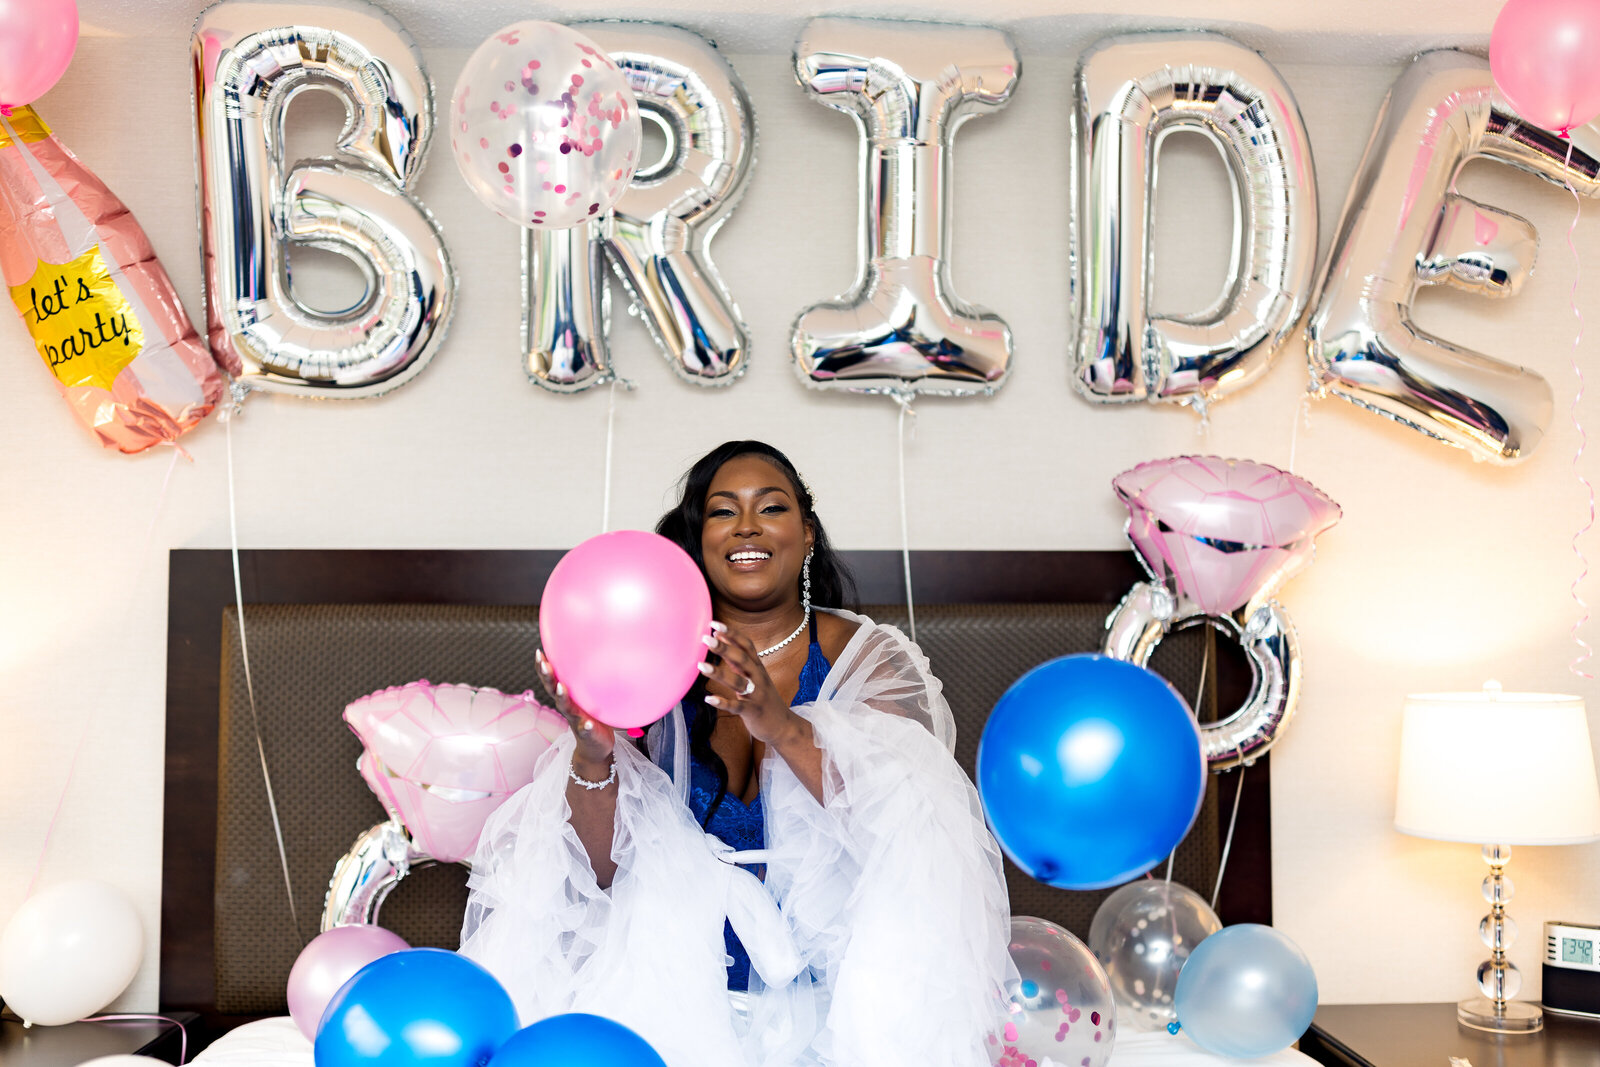 The black bride is posing with balloons on the bed happy.